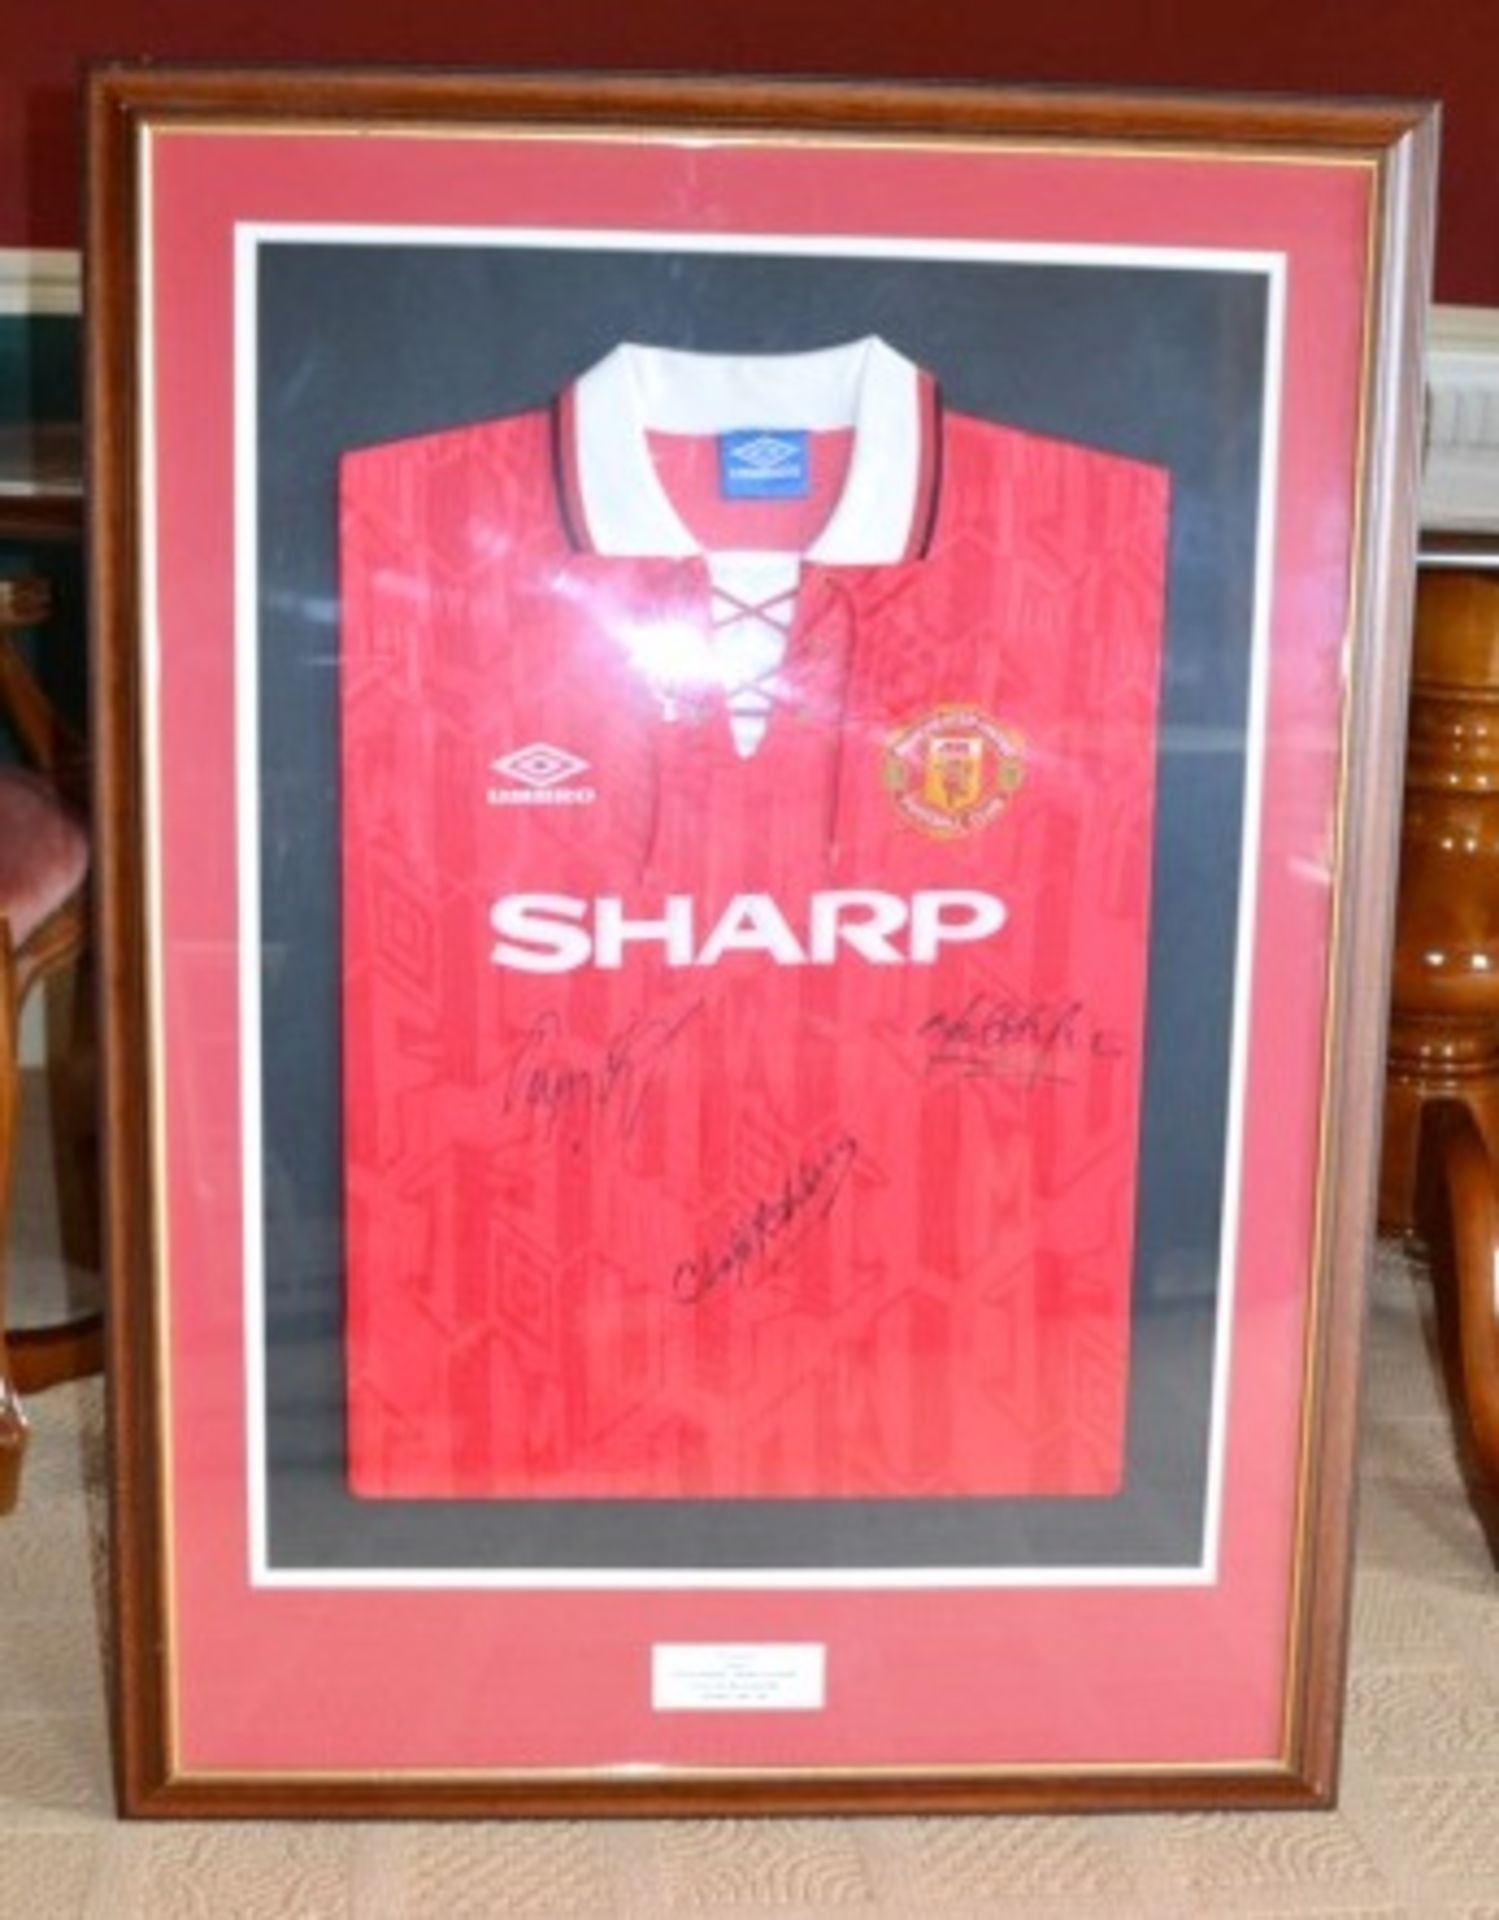 1 x Framed And Mounted Ryan Giggs Signed Football Shirt Autographed By 3 Players (Giggs, Hughes - Image 2 of 7